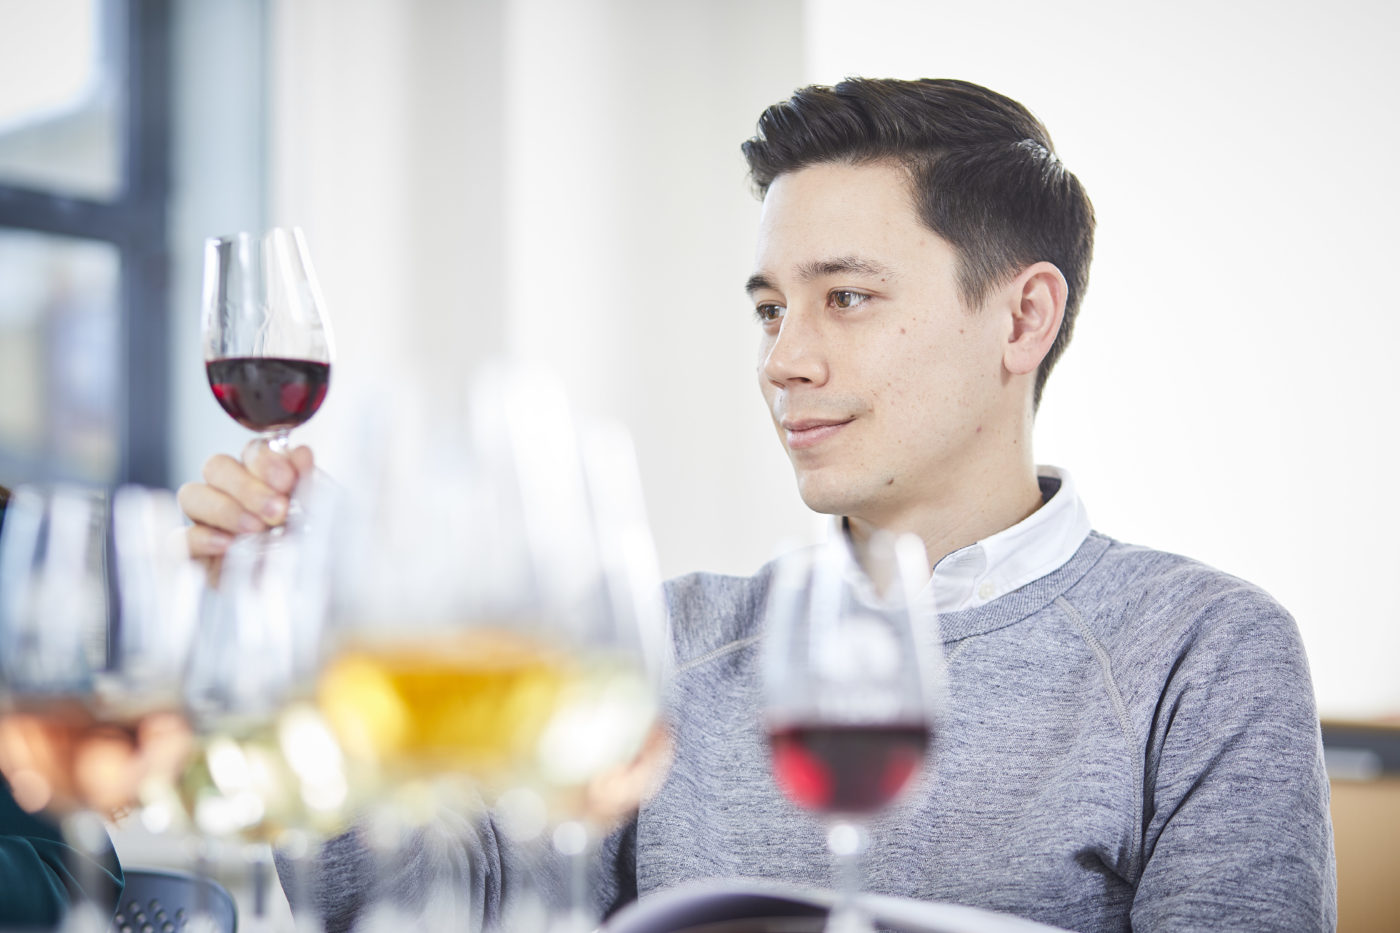 Man sitting at t table with various glasses of wine in front him. He is holding up and looking at a red wine.